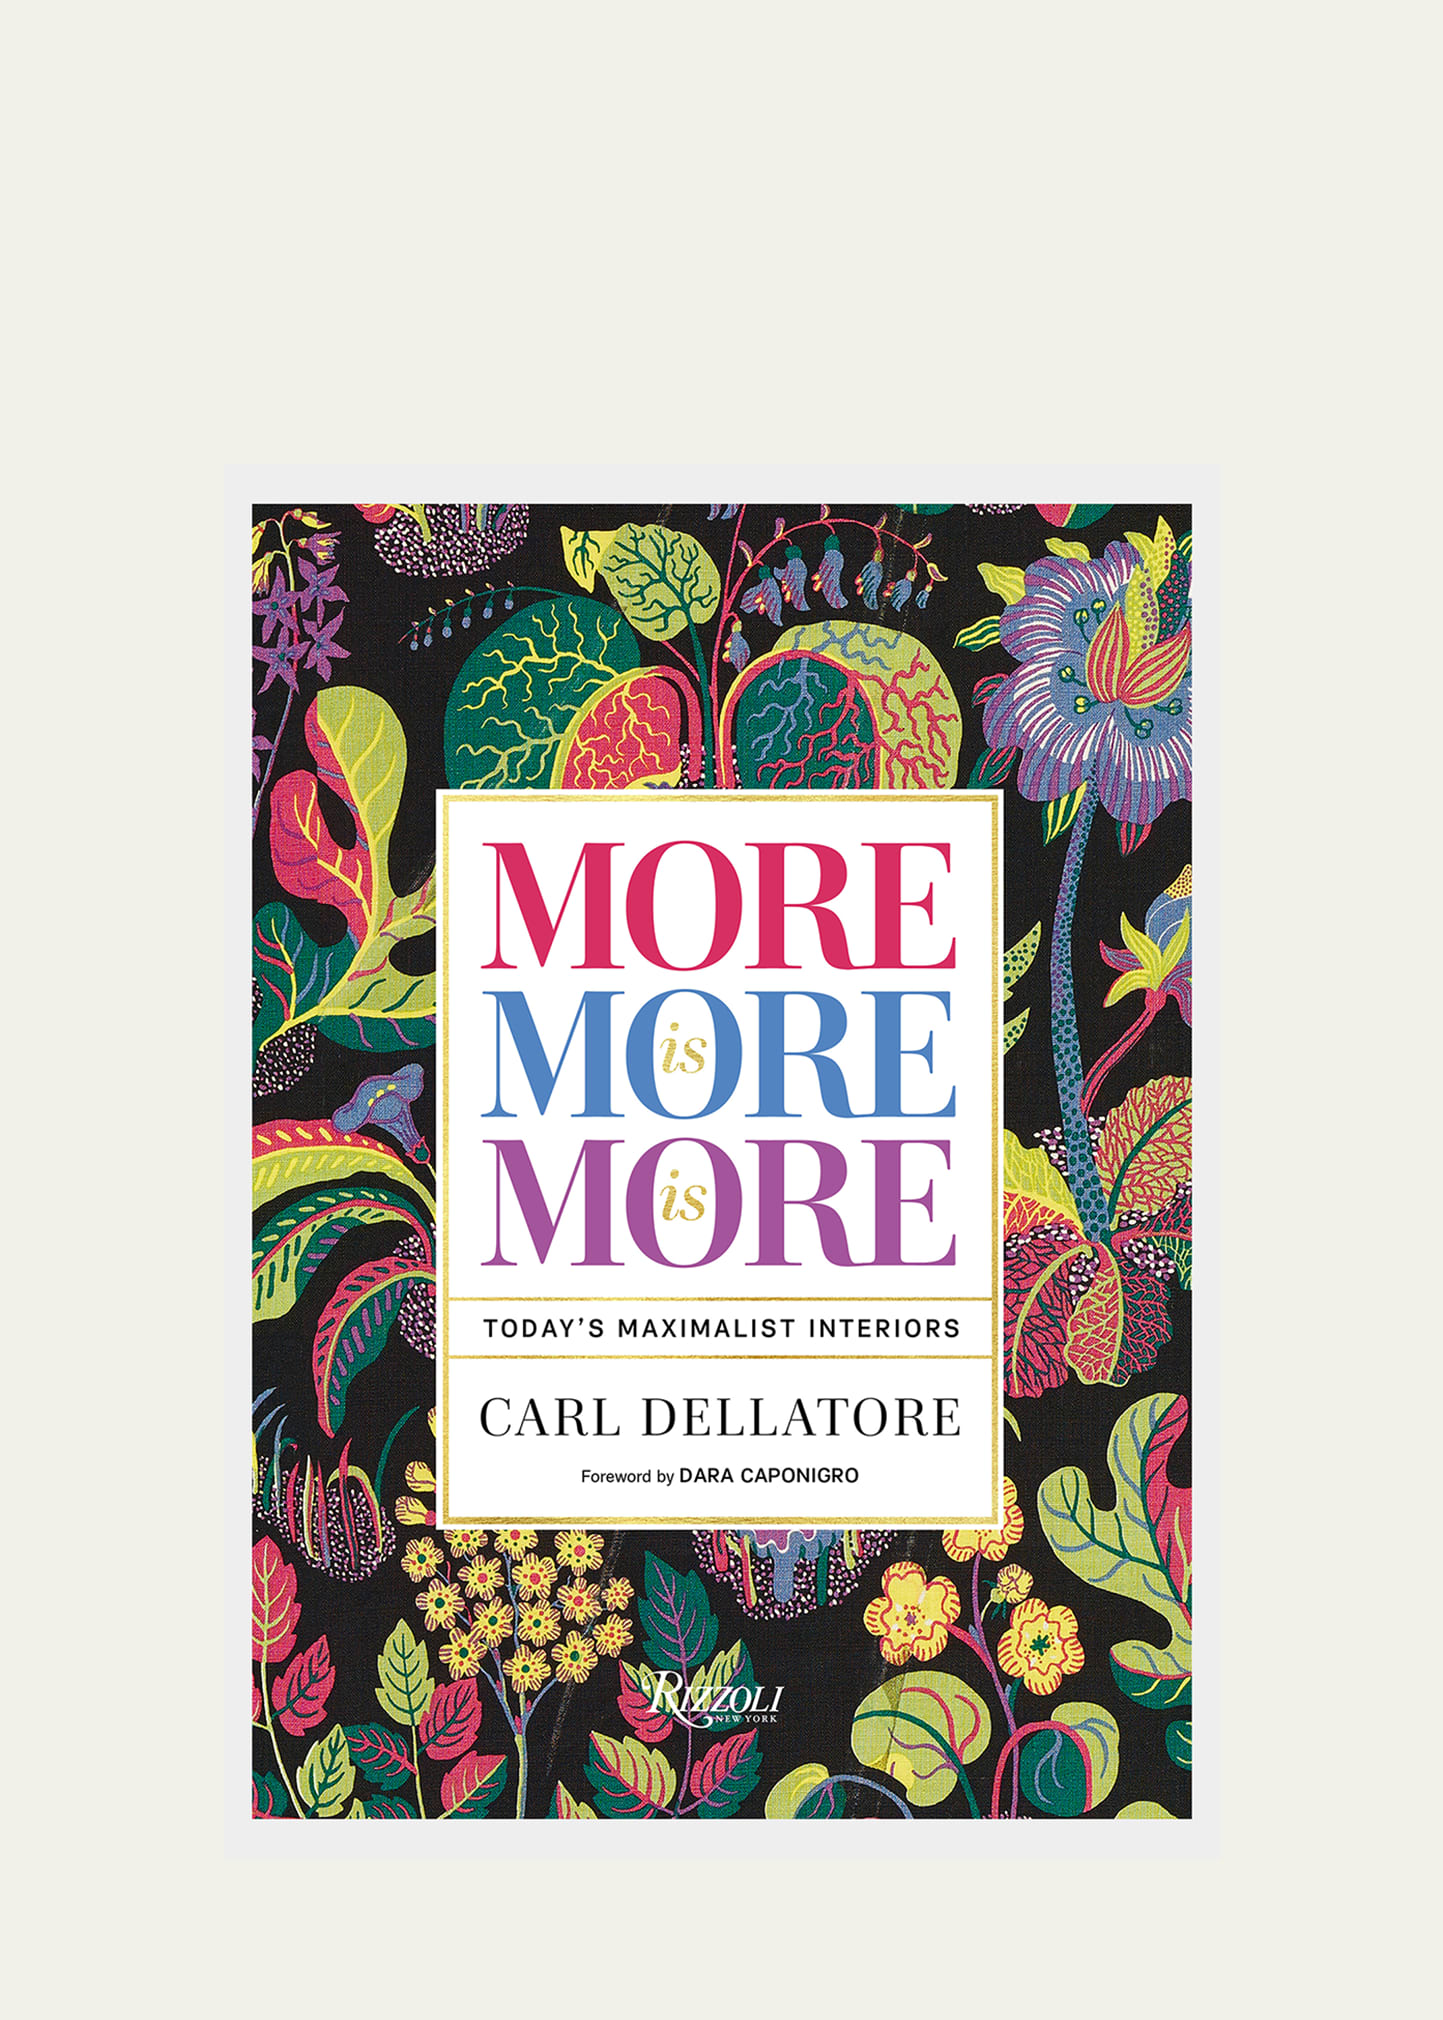 "More is More is More Today's Maximalist Interiors" Book by Carl Dellatore